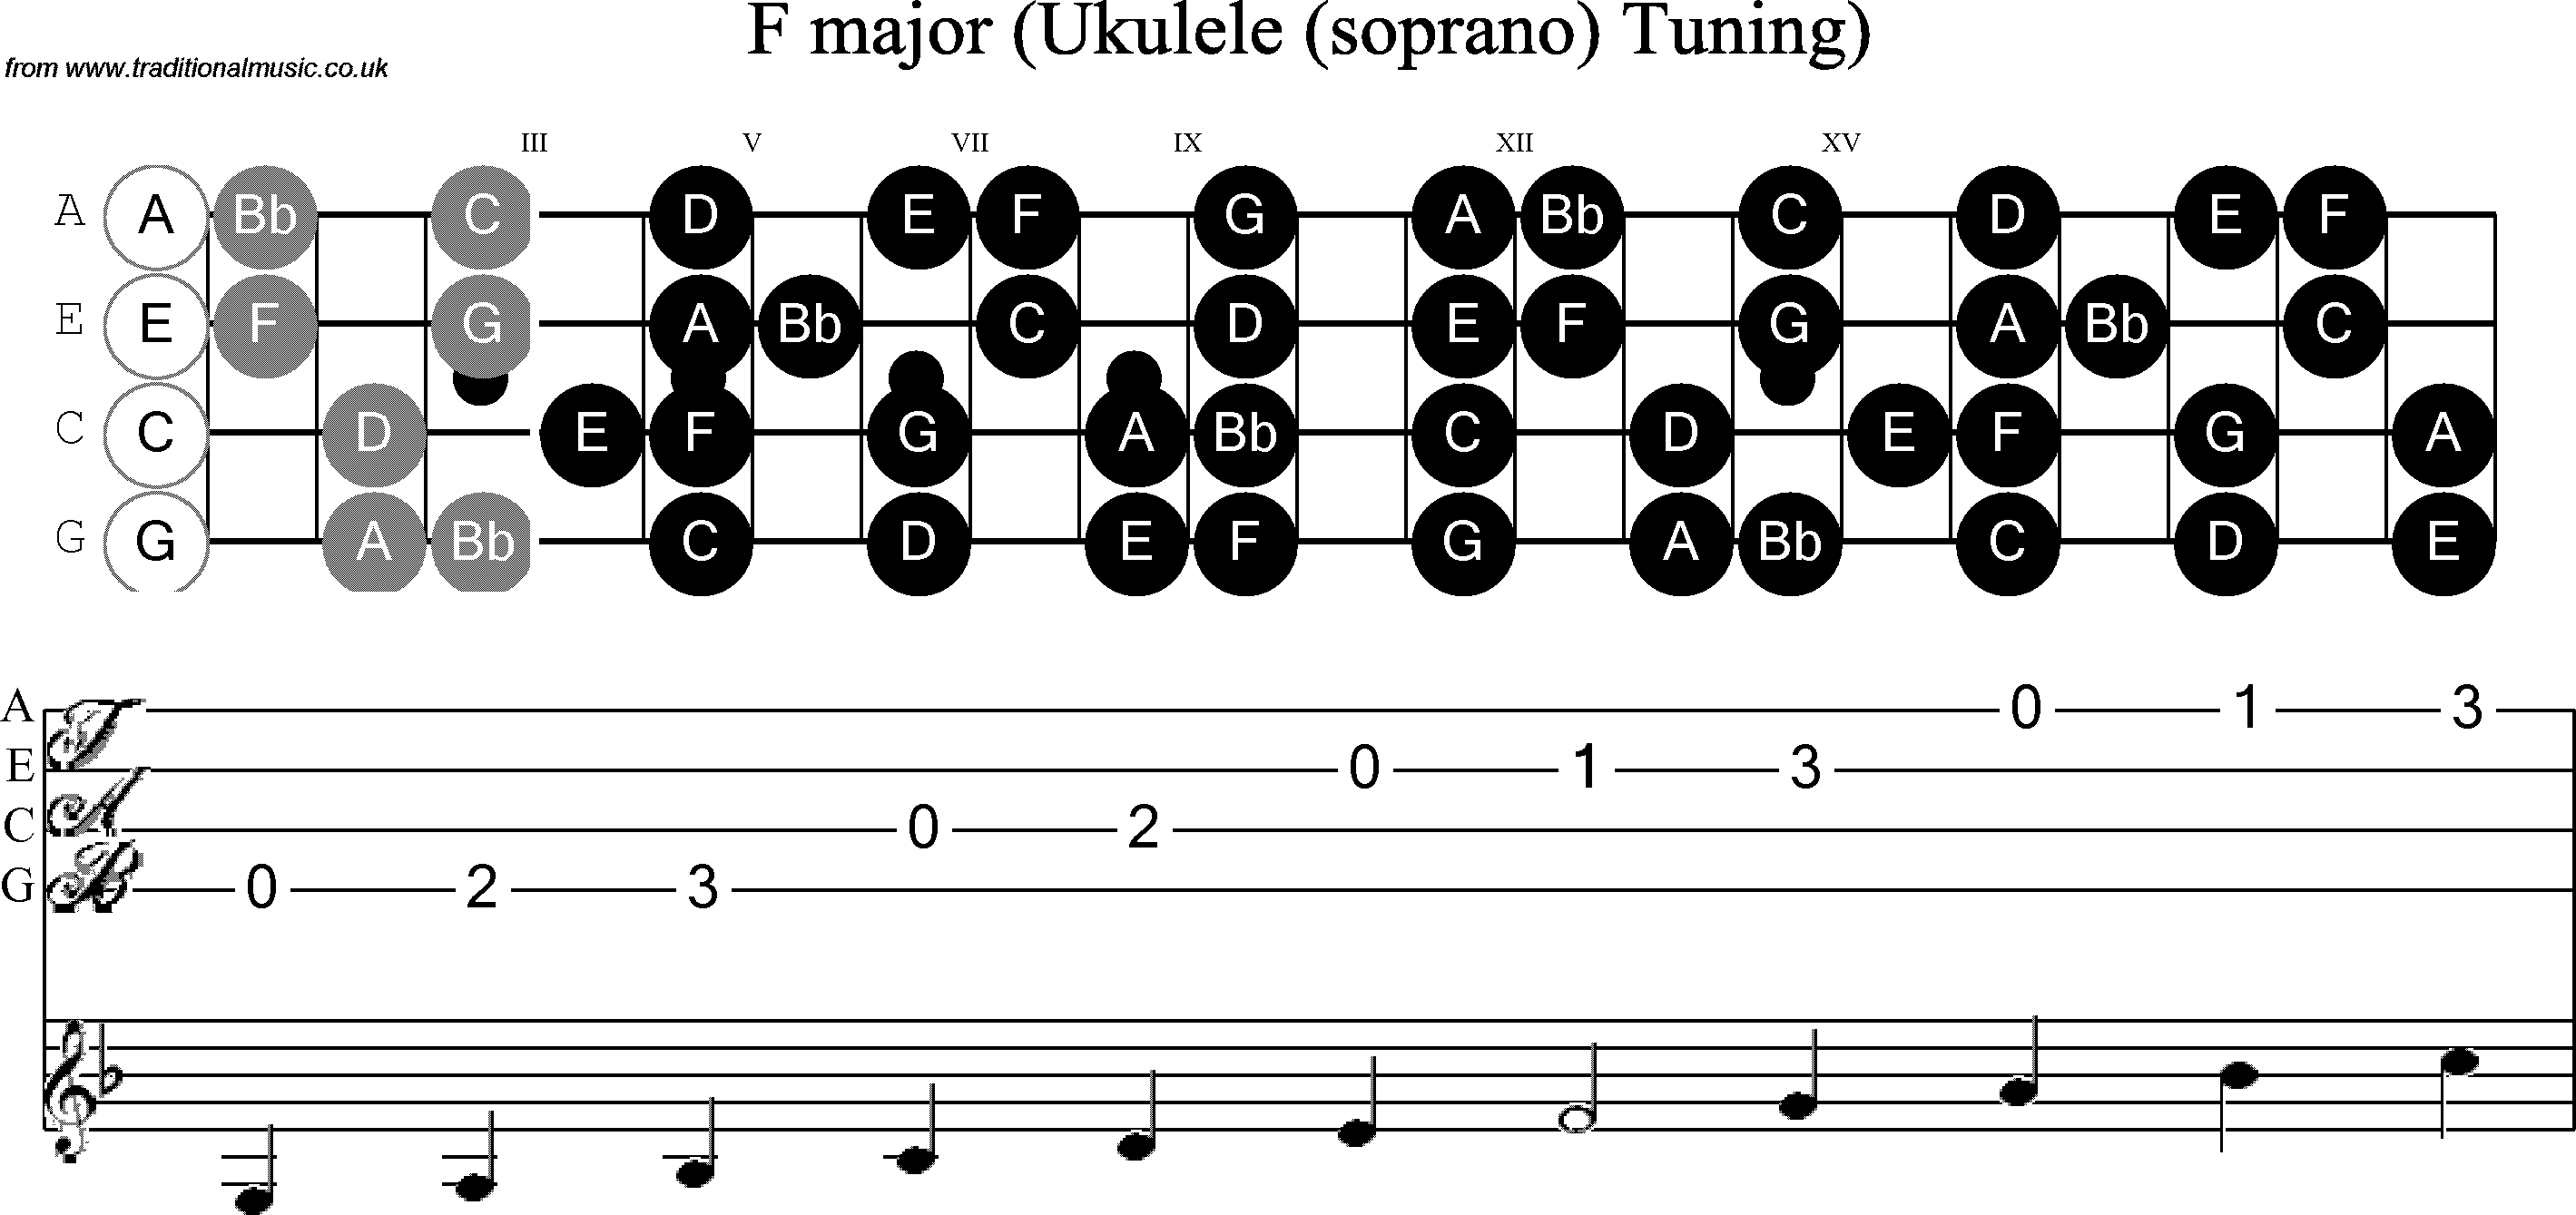 Scale, stave and neck diagram for Ukulele F